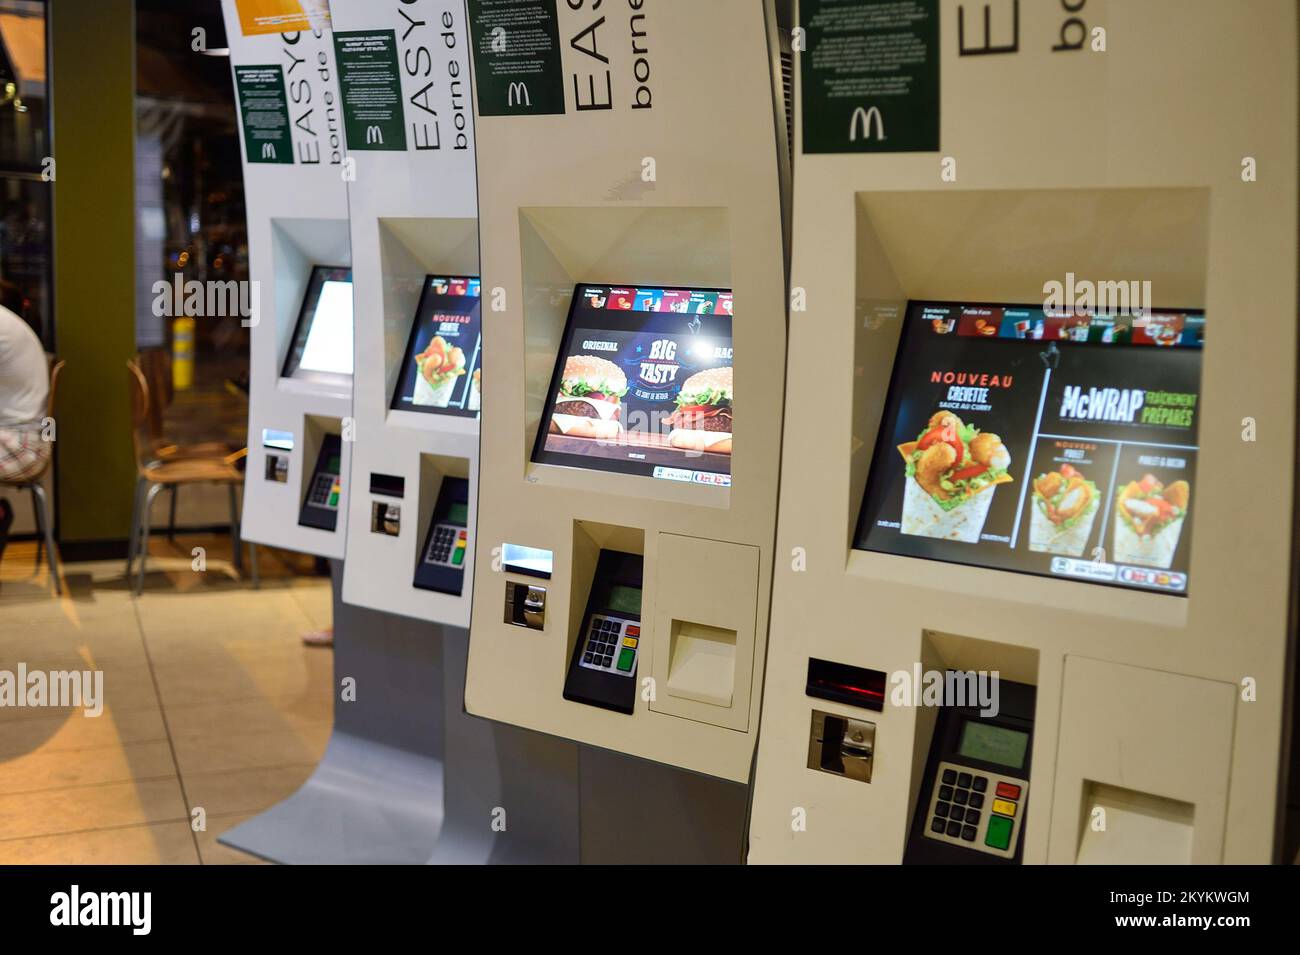 PARIS, FRANCE - AUGUST 10, 2015: McDonald's restaurant interior. McDonald's is the world's largest chain of hamburger fast food restaurants, founded i Stock Photo